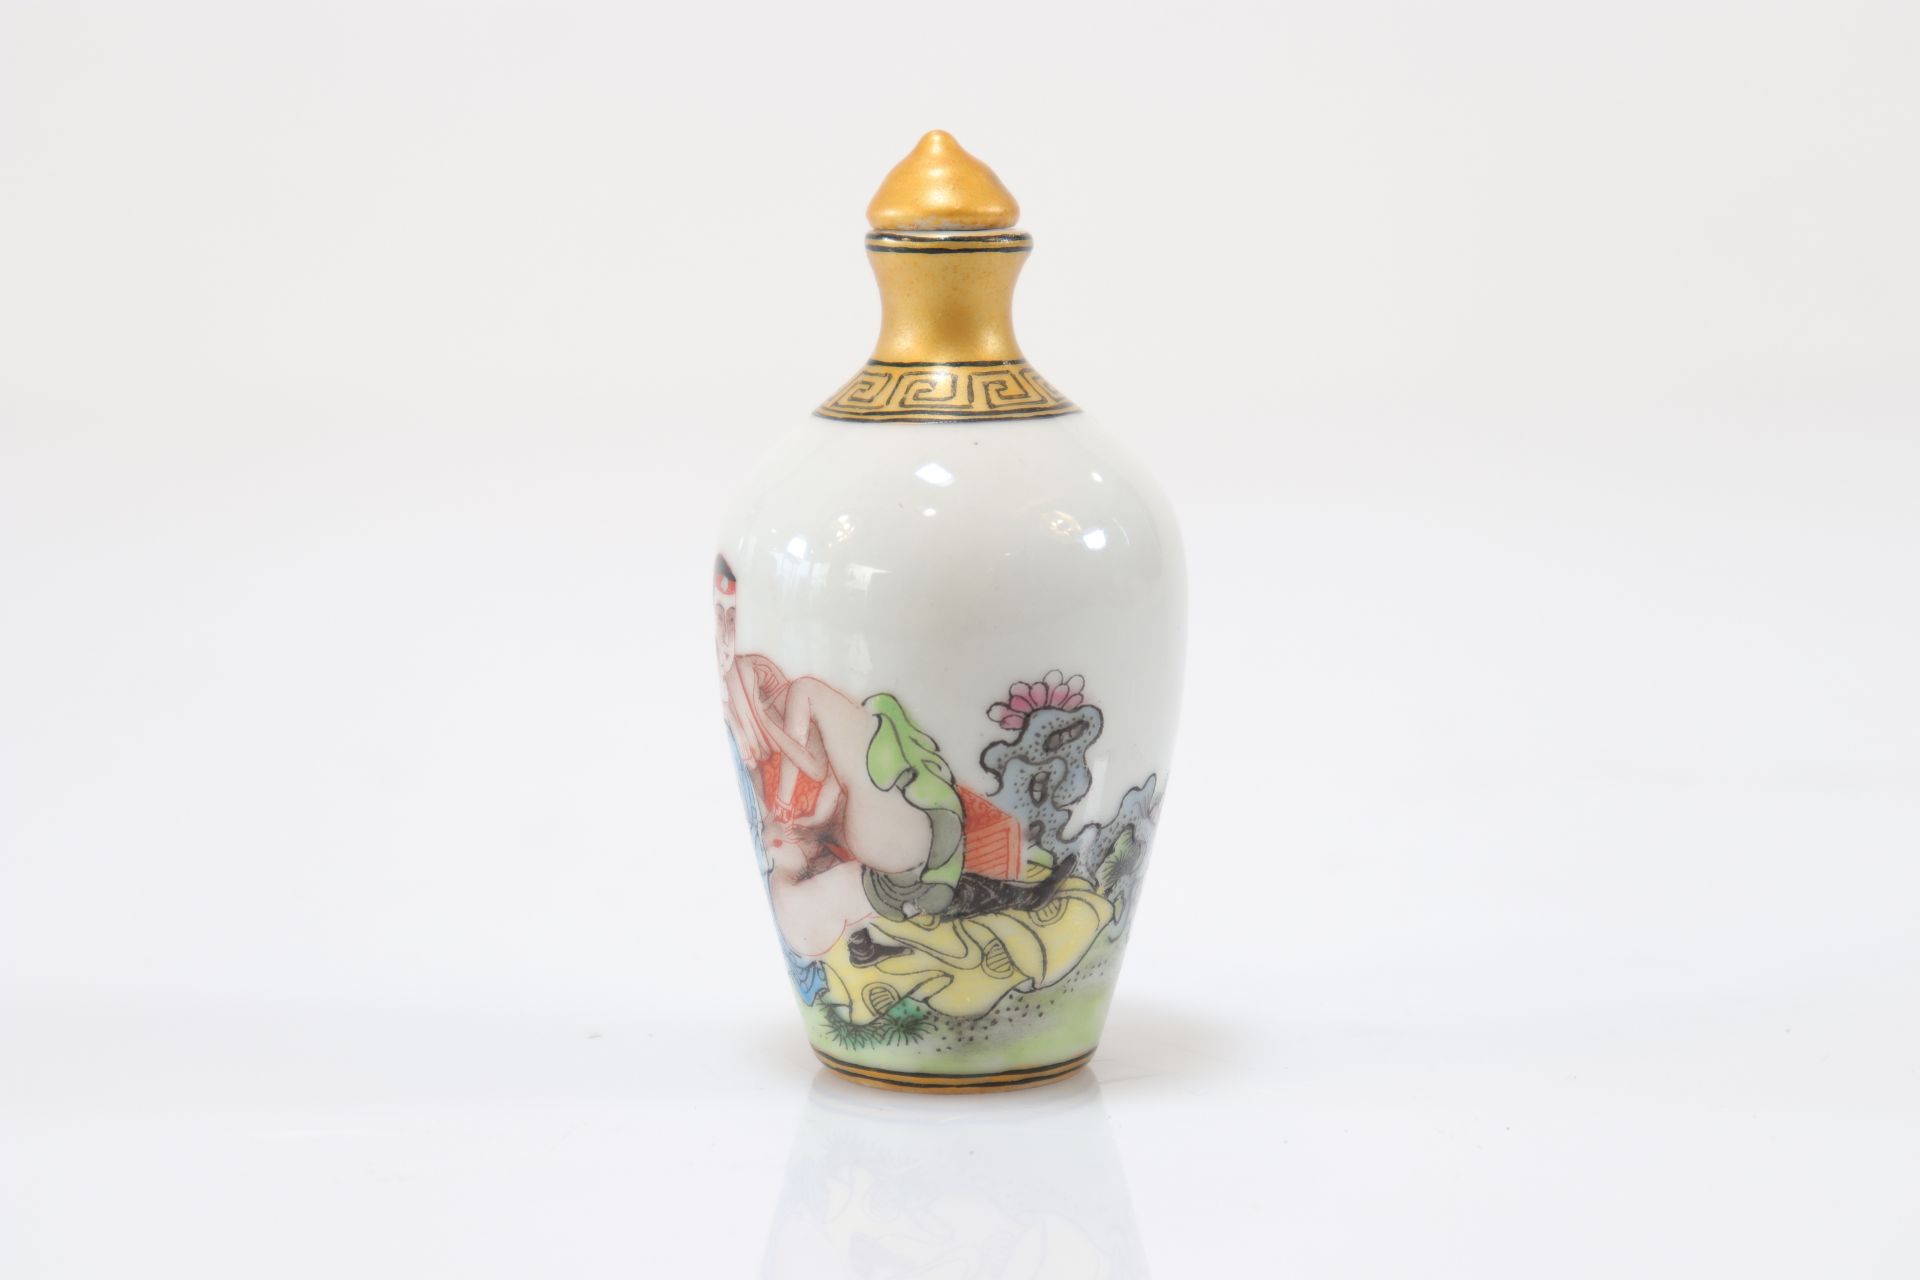 Chinese porcelain snuffbox with erotic decor - Image 3 of 4